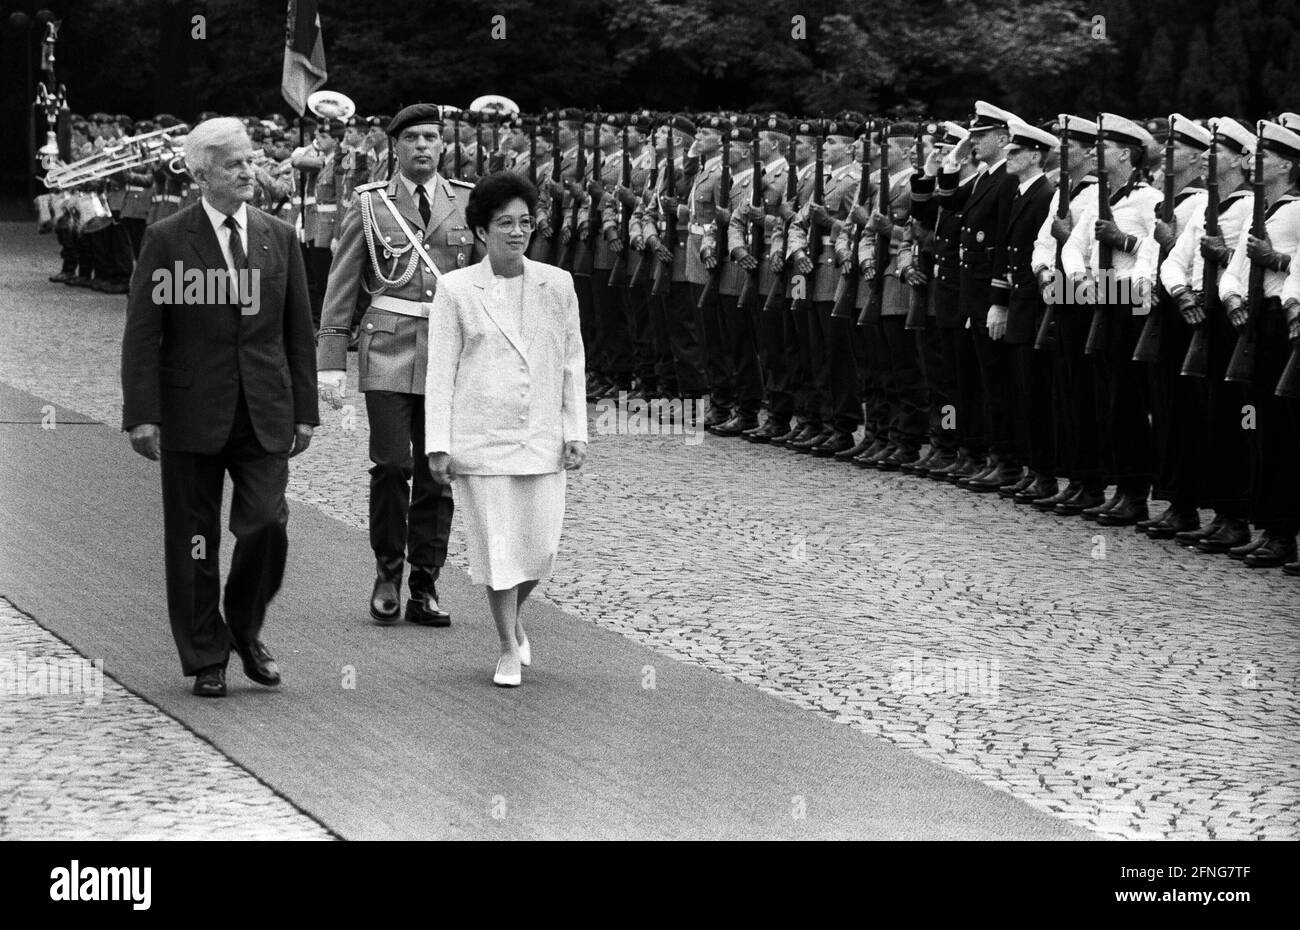 Germany, Bonn, 11.07.1989. Archive No: 07-09-14 State visit of the President of the Philippines Photo: Federal President Richard von Weizaecker and President Corazon Aquino [automated translation] Stock Photo